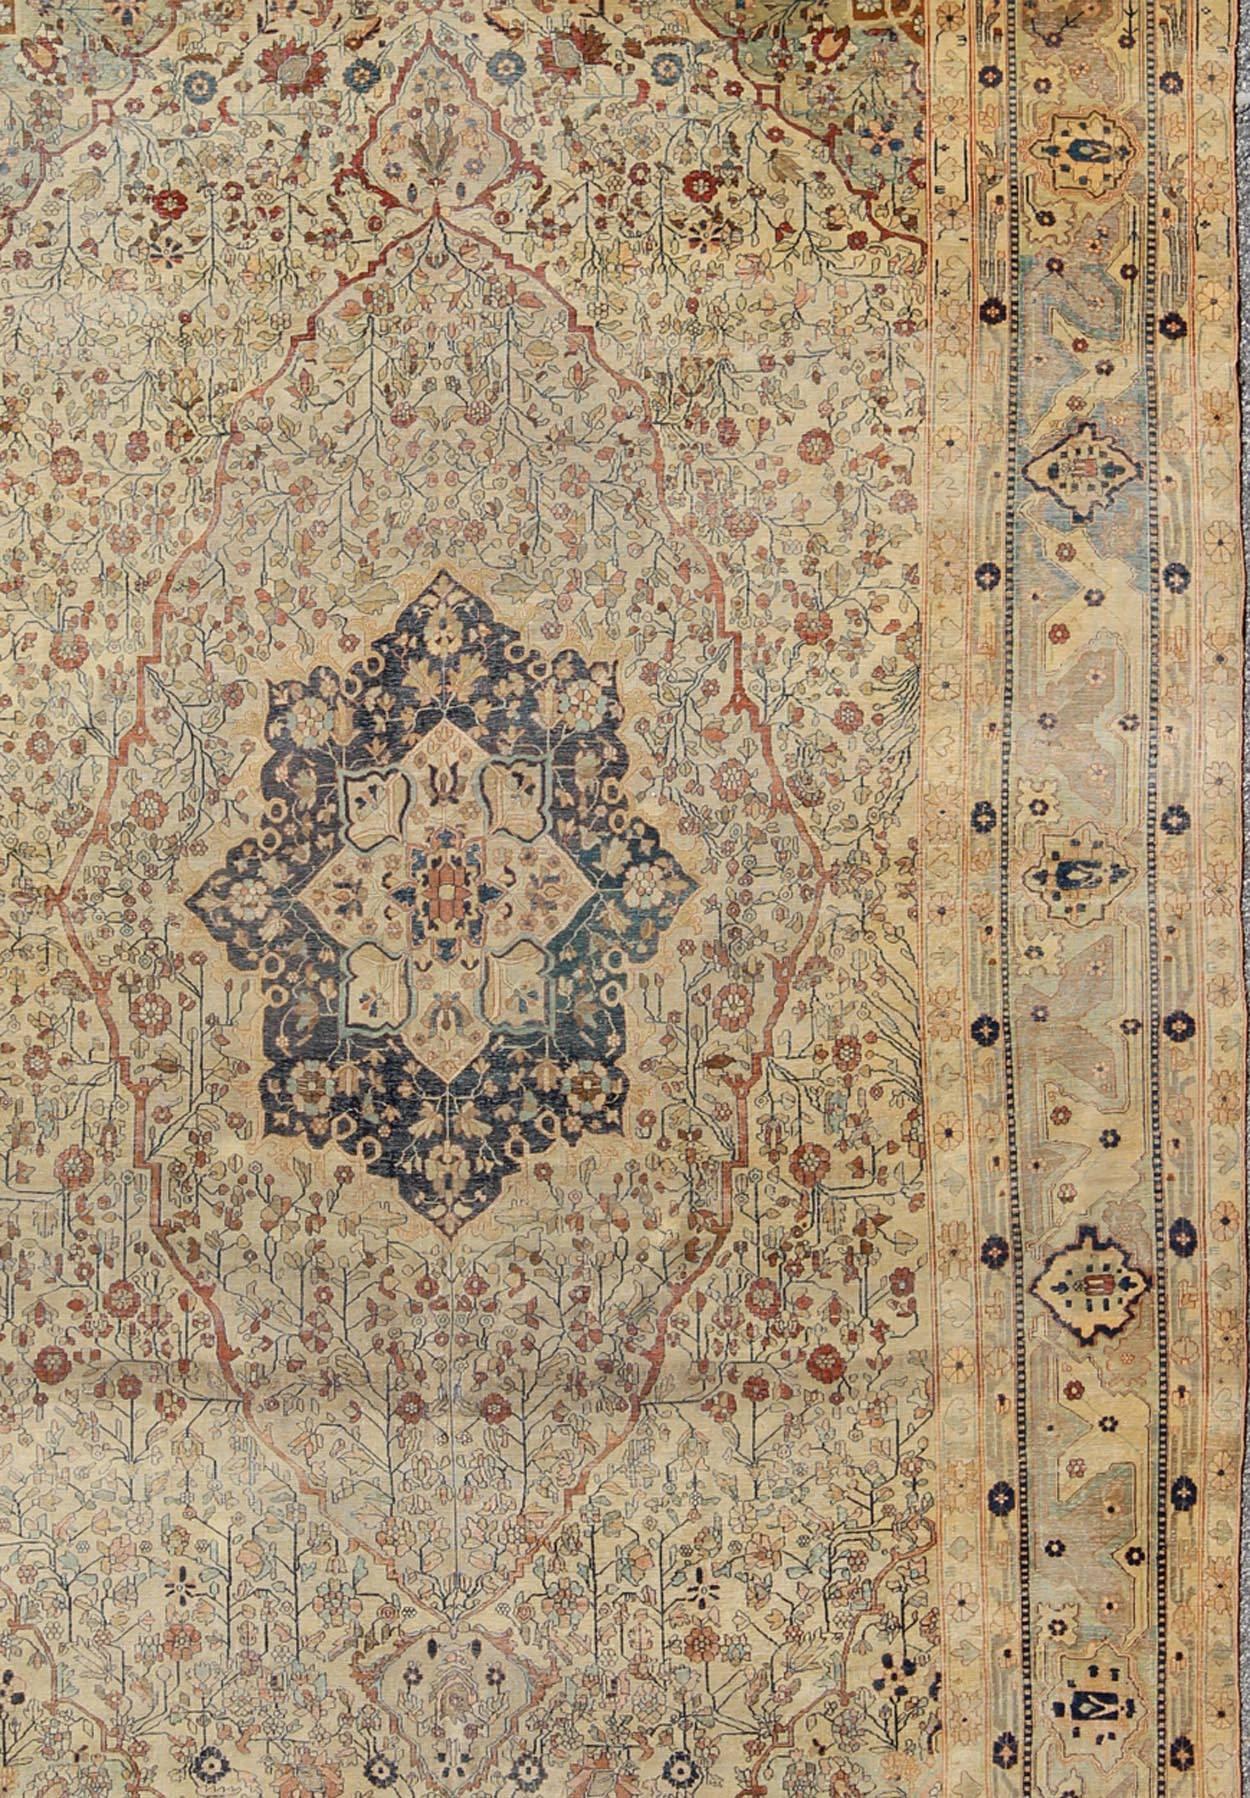 Hand-Knotted 19th Century Persian Mohtesham Kashan Rug in Cream and Light blue, light Green